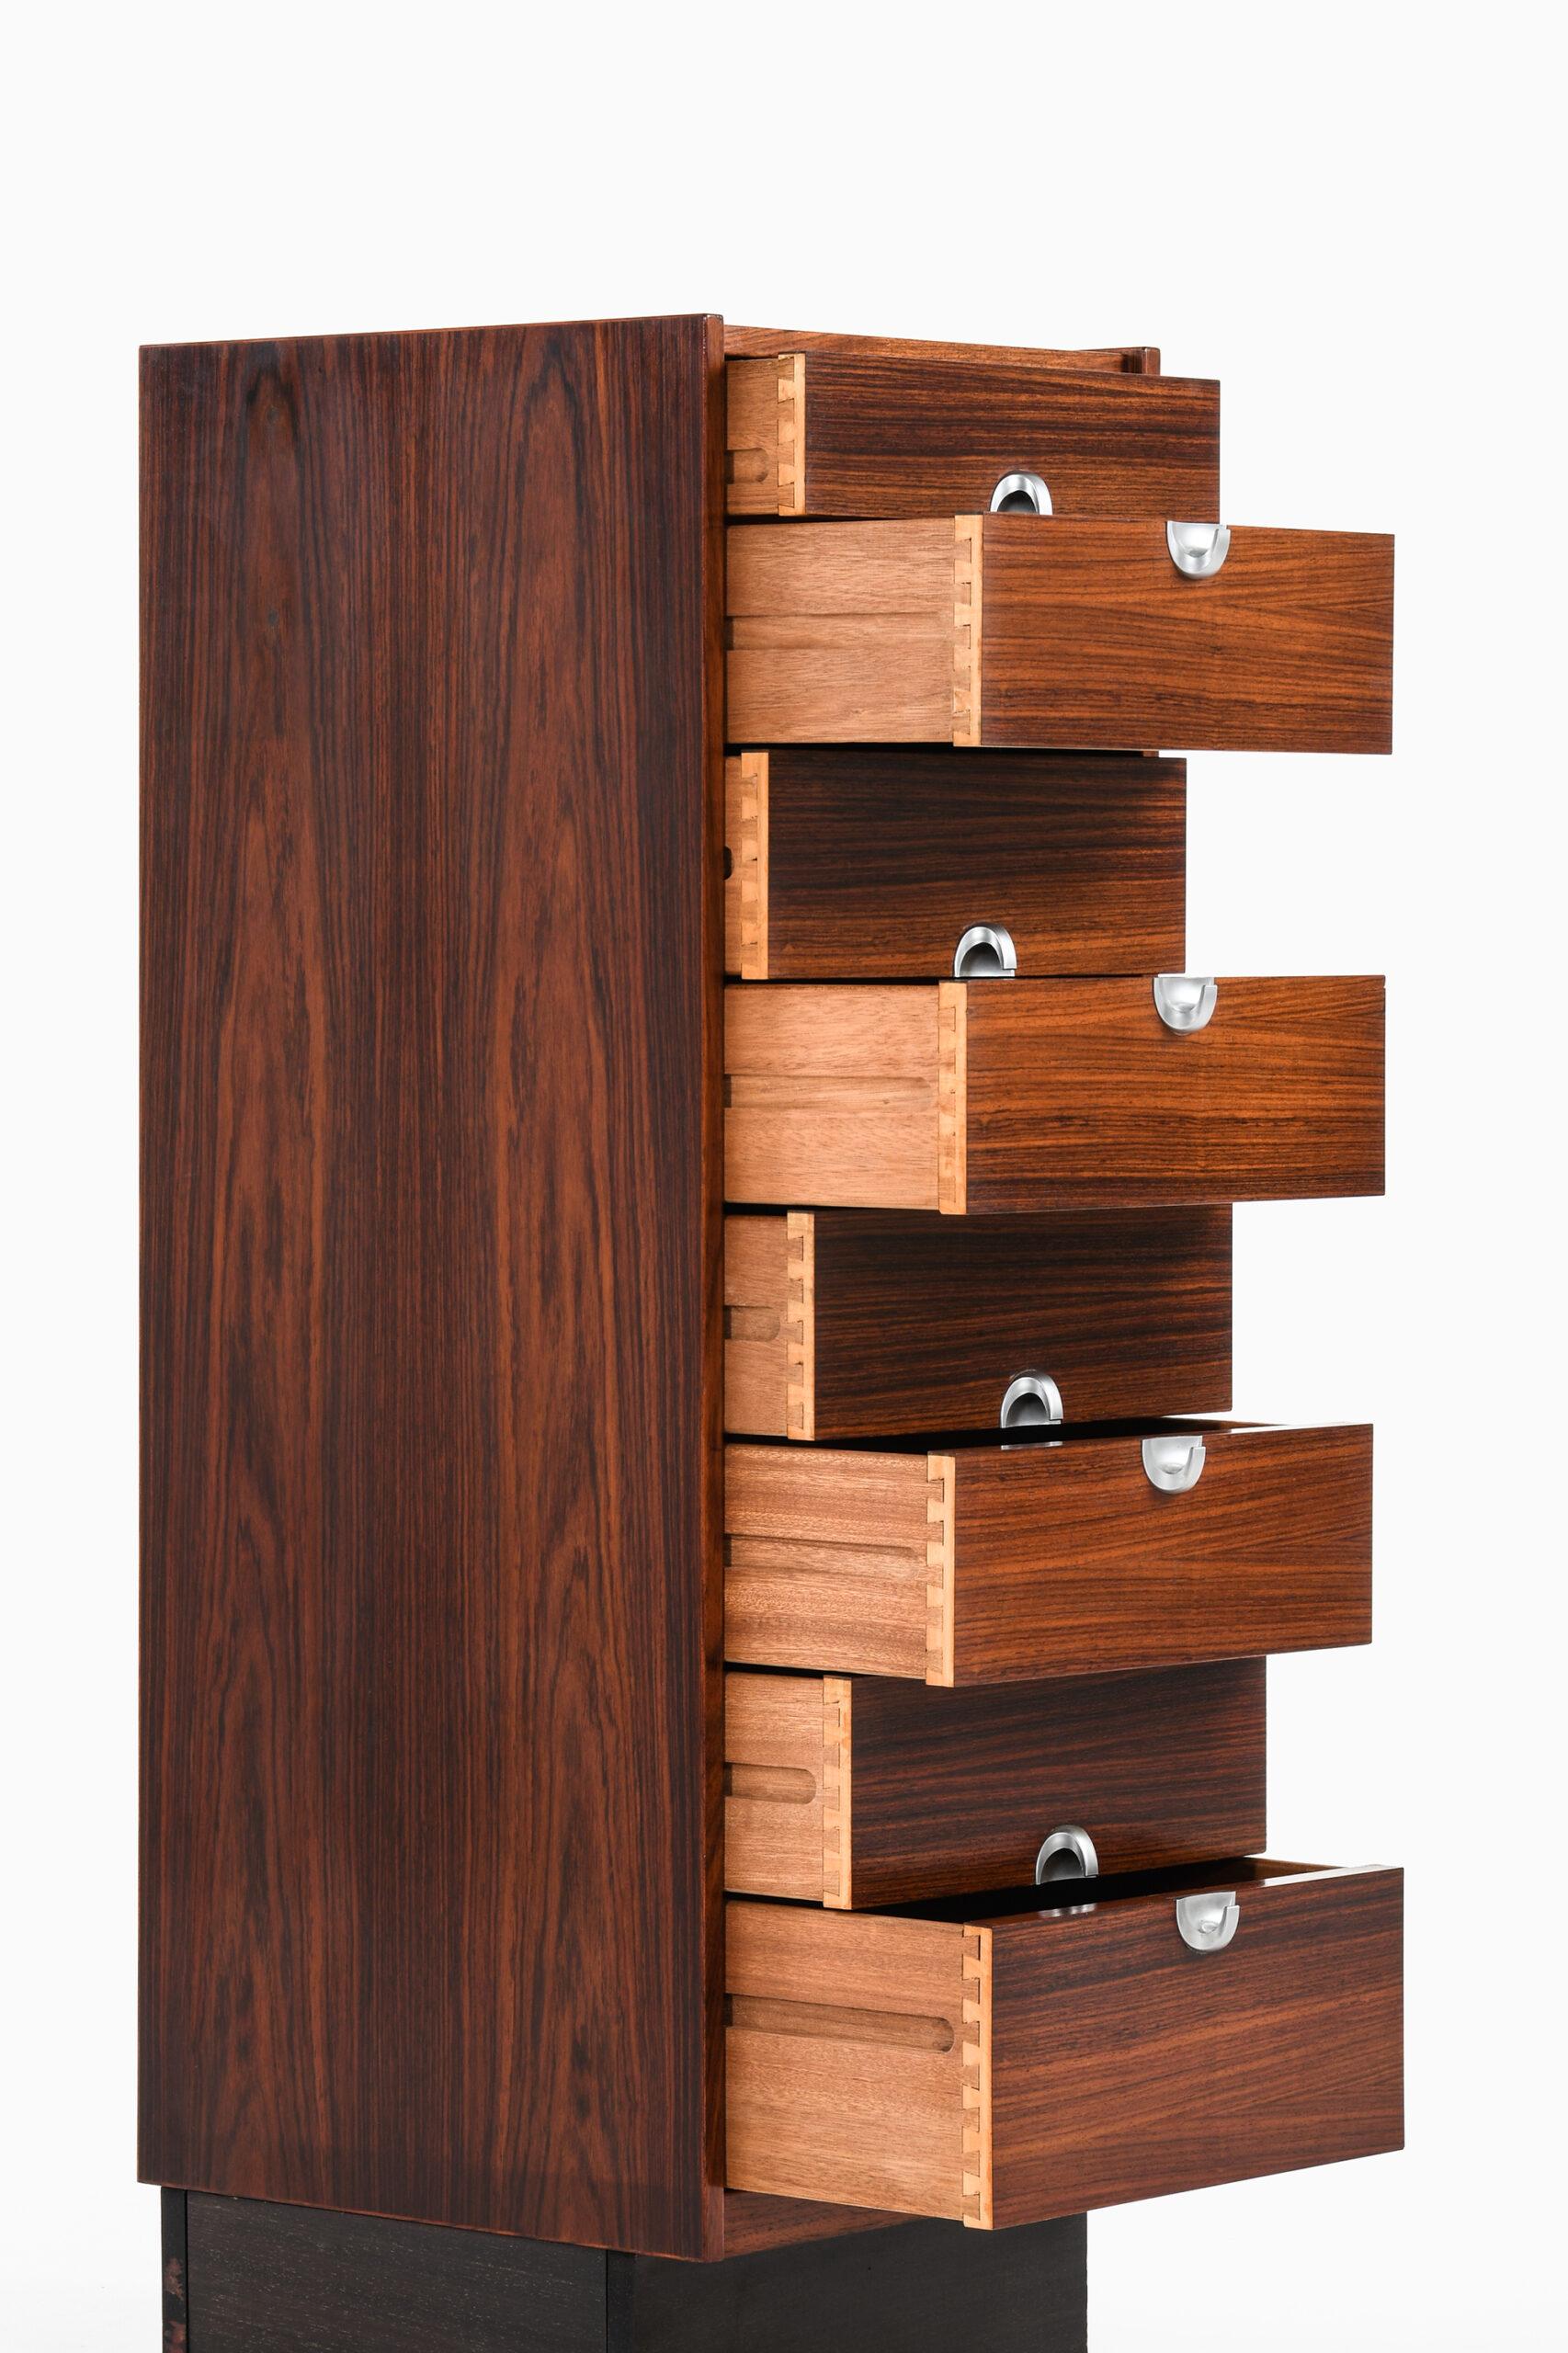 Steel Bureau or Chest of Drawers Produced in Denmark